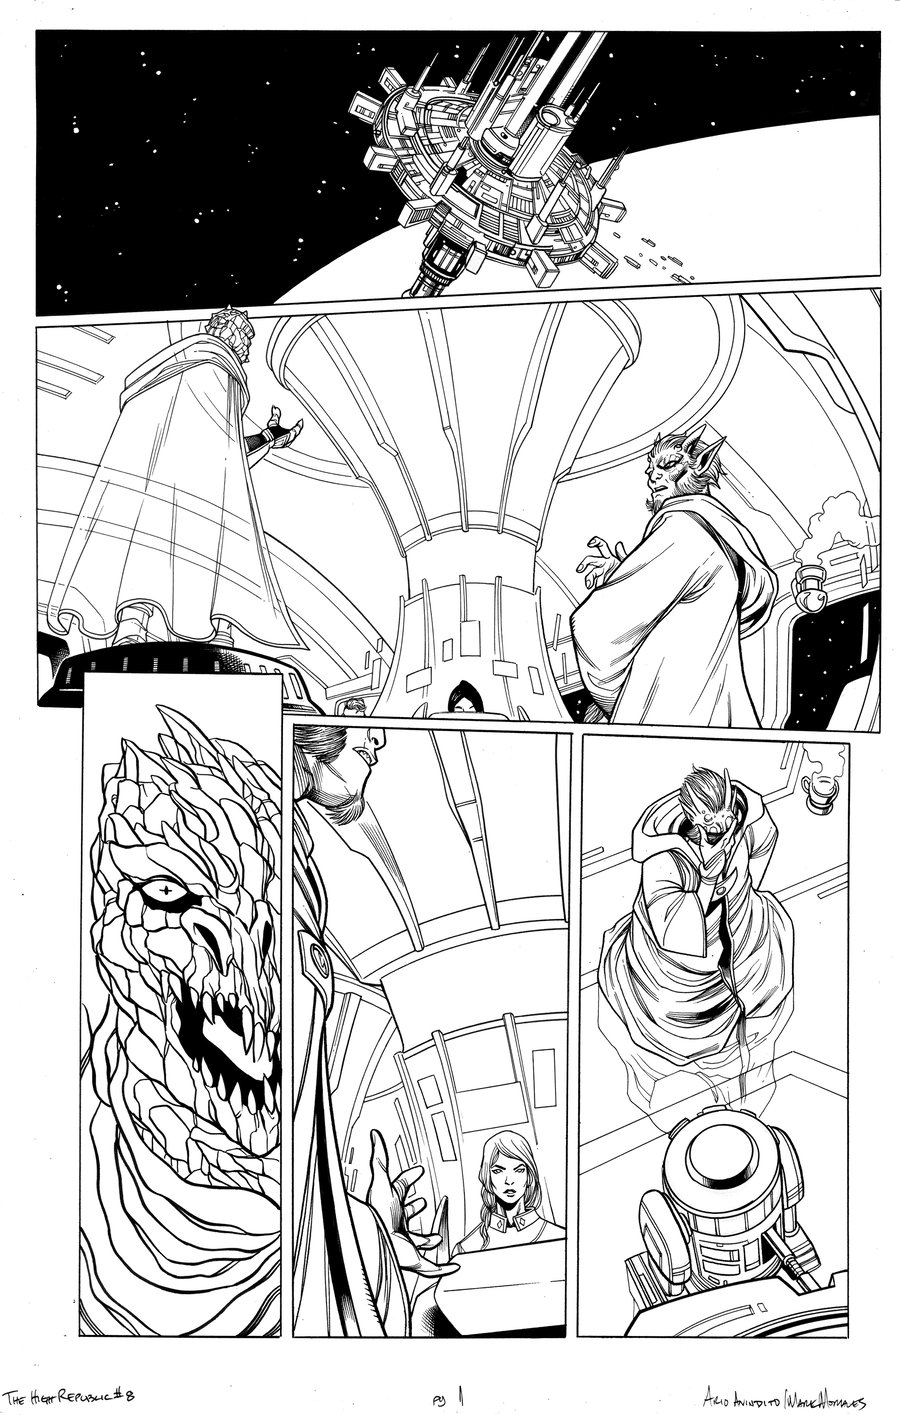 Image of Star Wars: The High Republic #8 PG 1